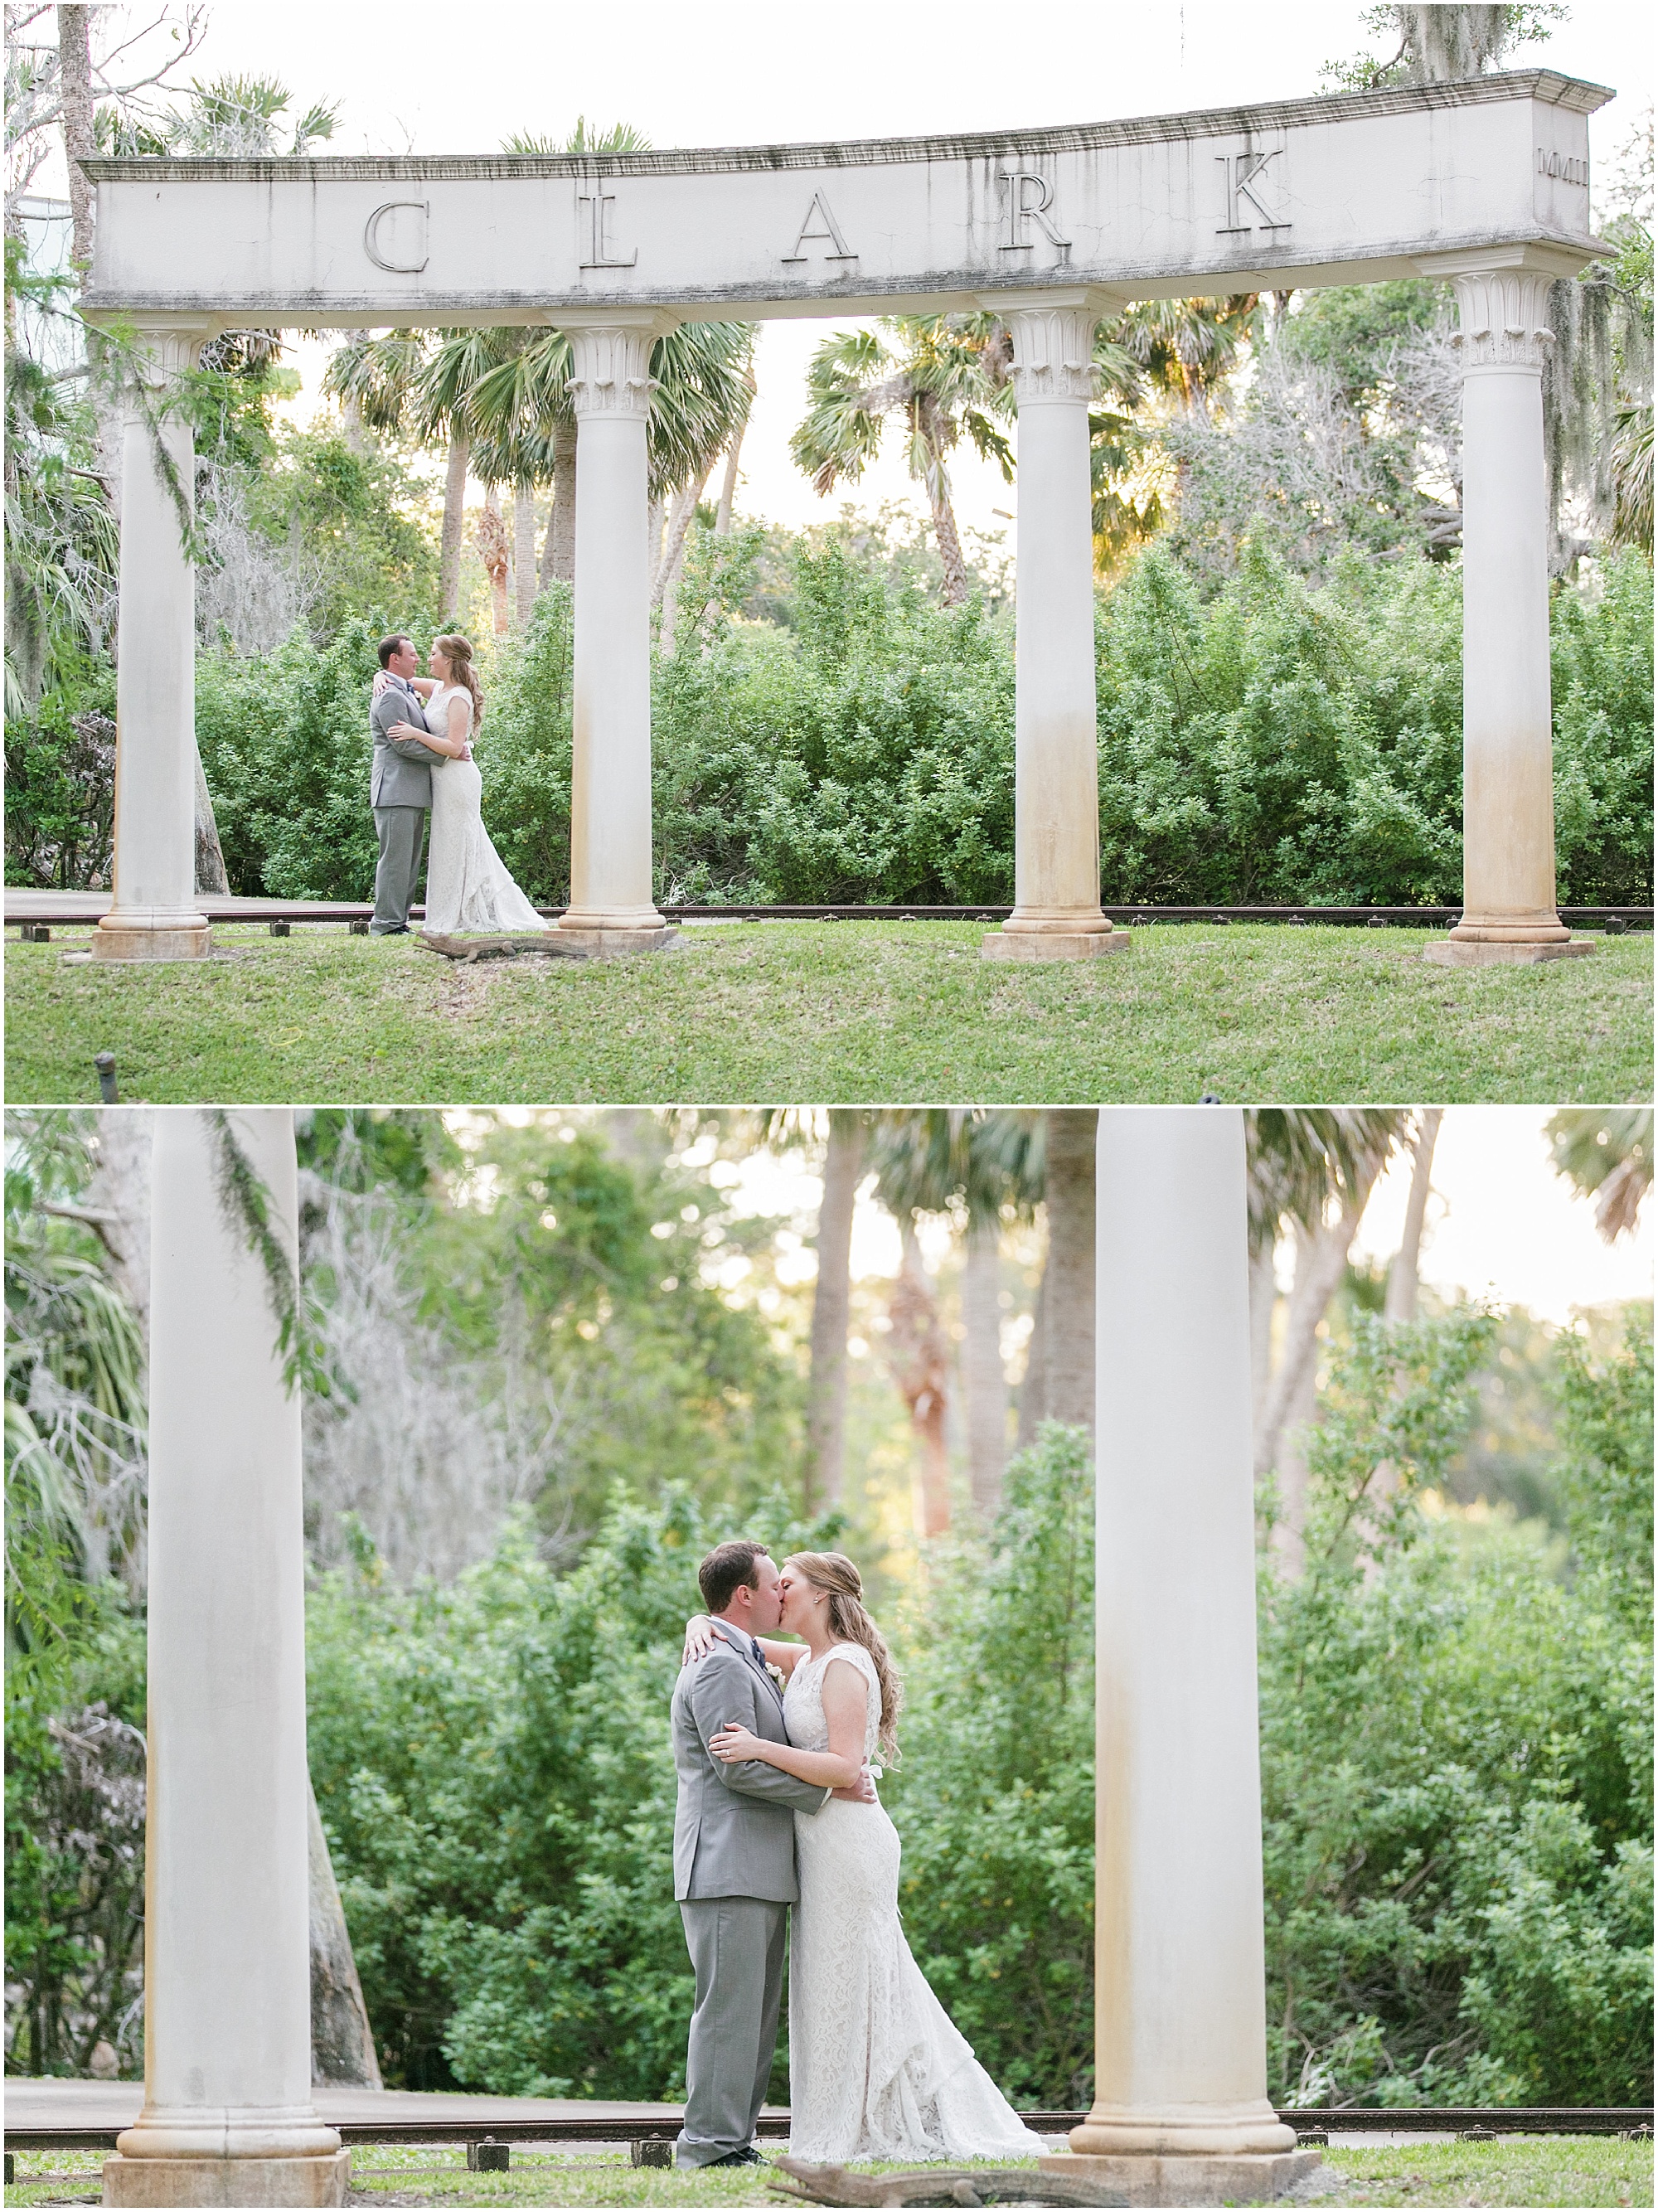 Bride and groom standing in front of old column structure.